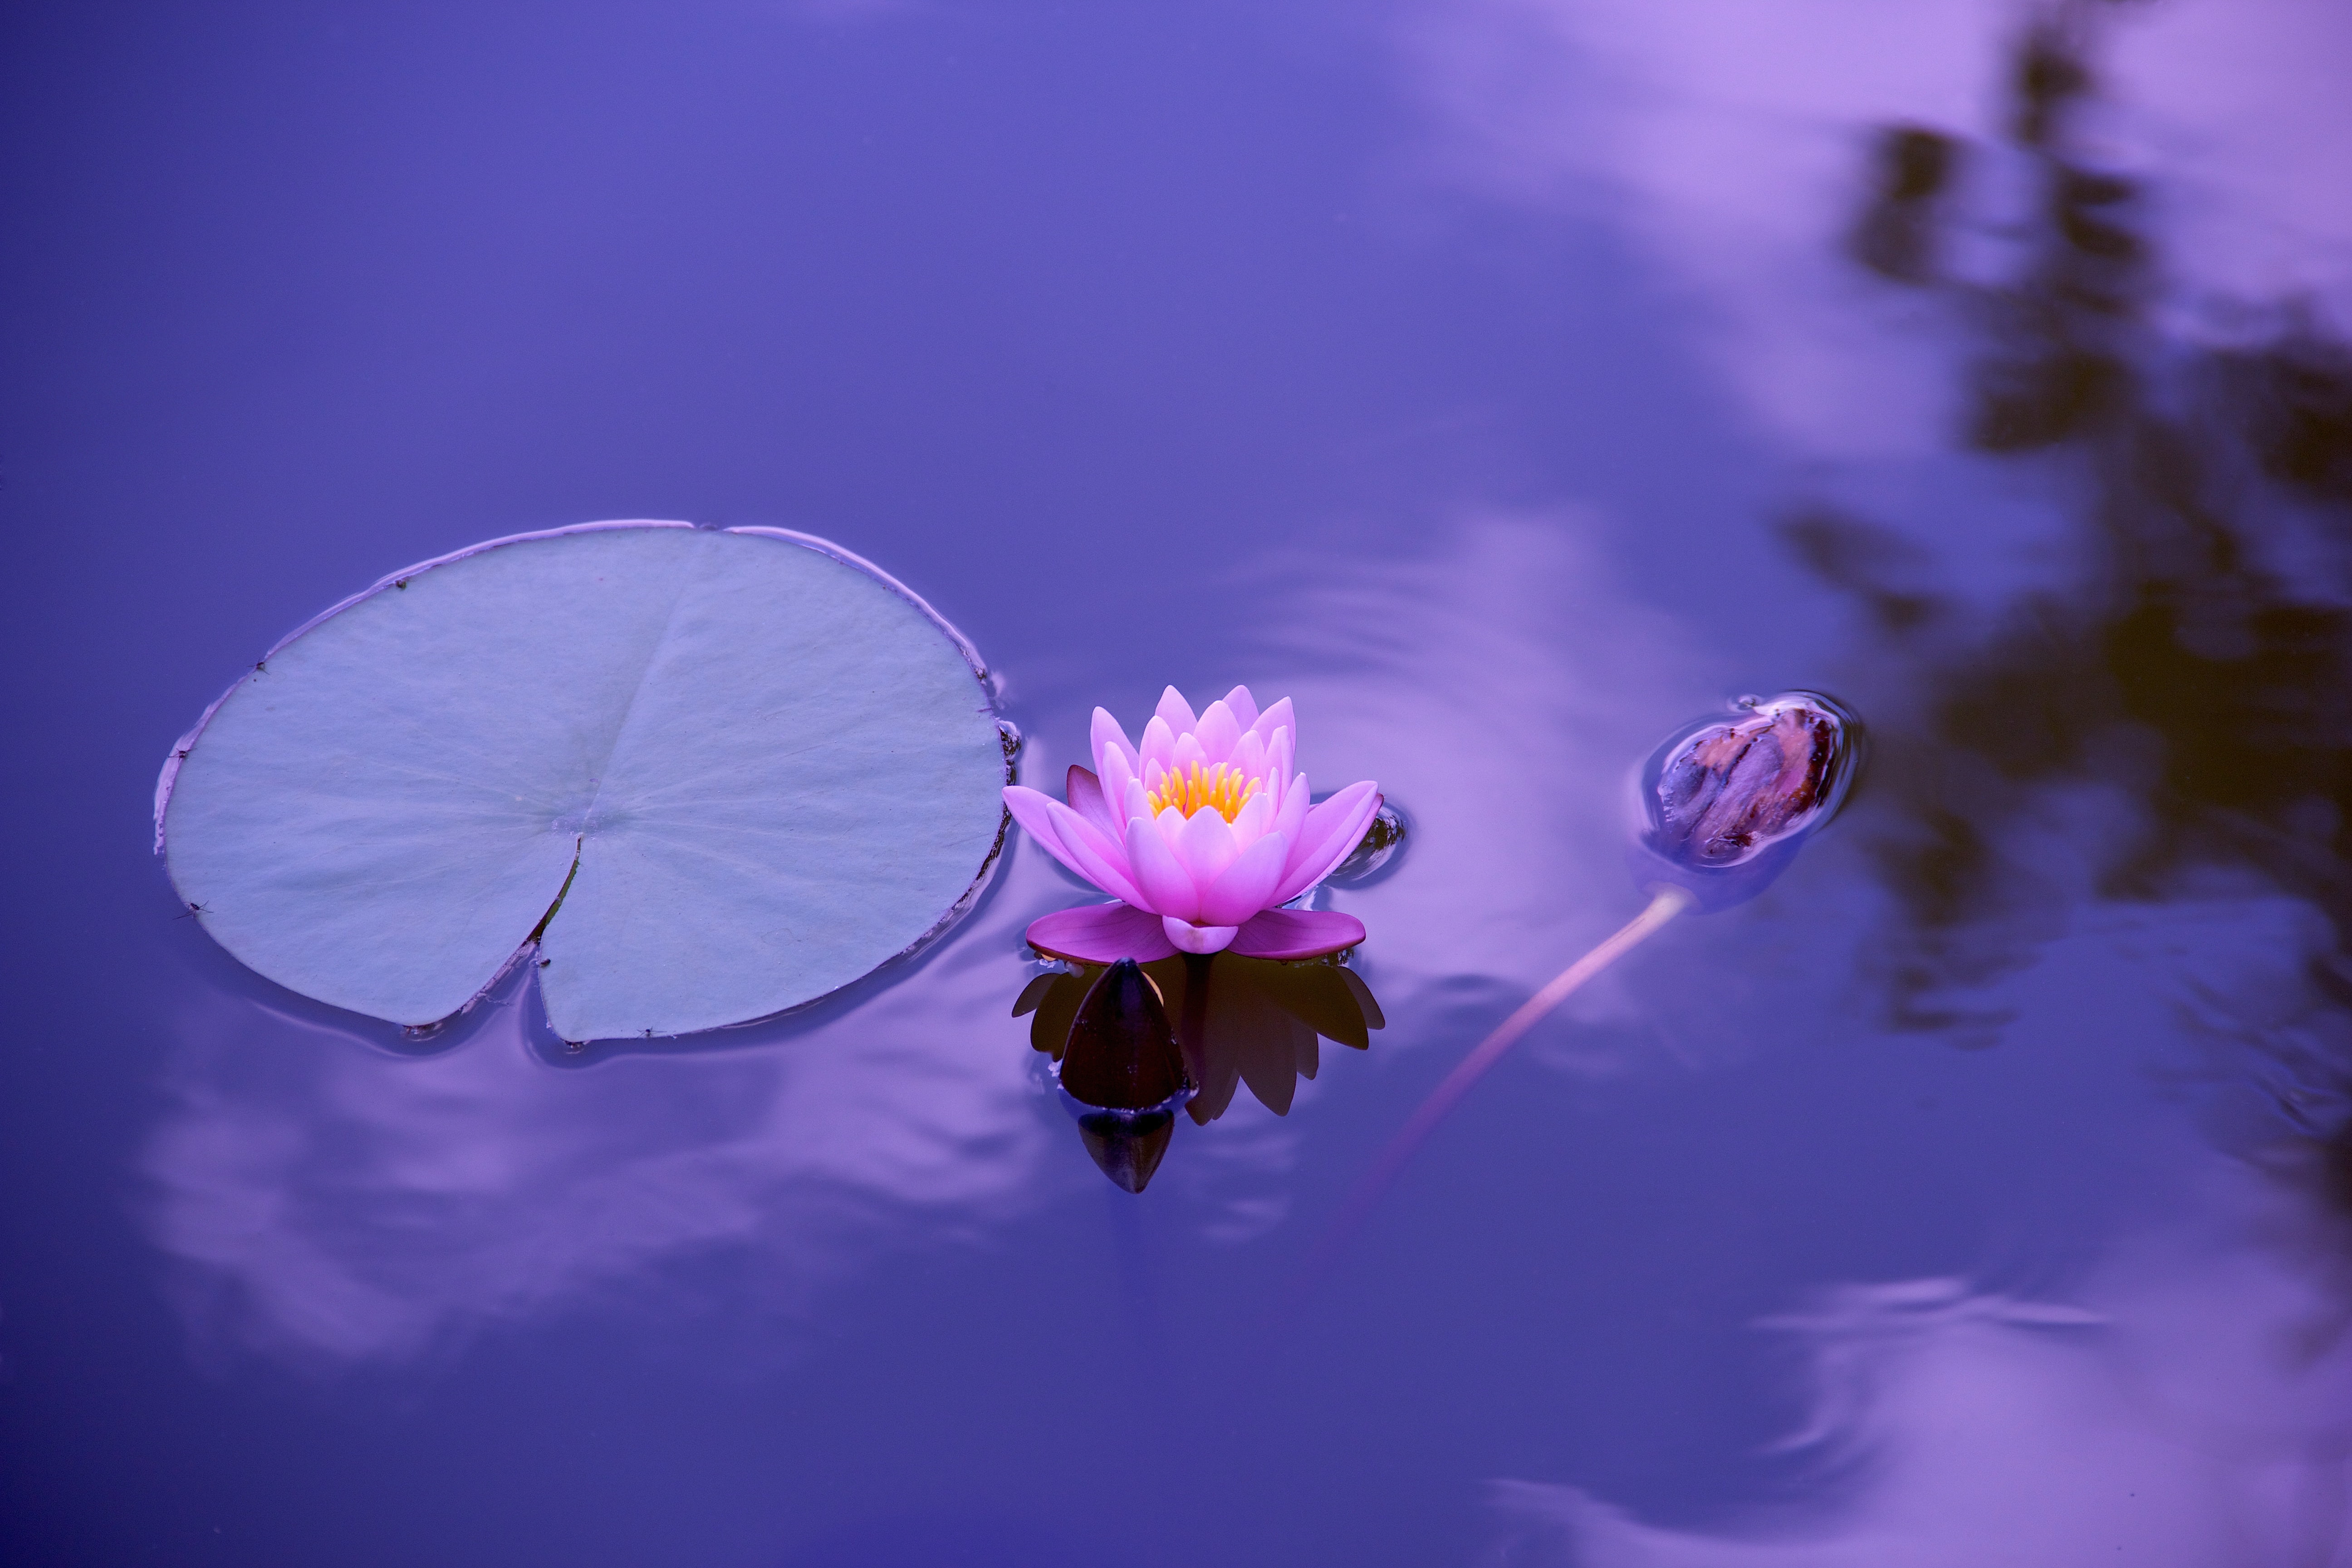 Pink Lotus Flower Beside Lily Pad On Calm Body Of Water Hd Images, Photos, Reviews